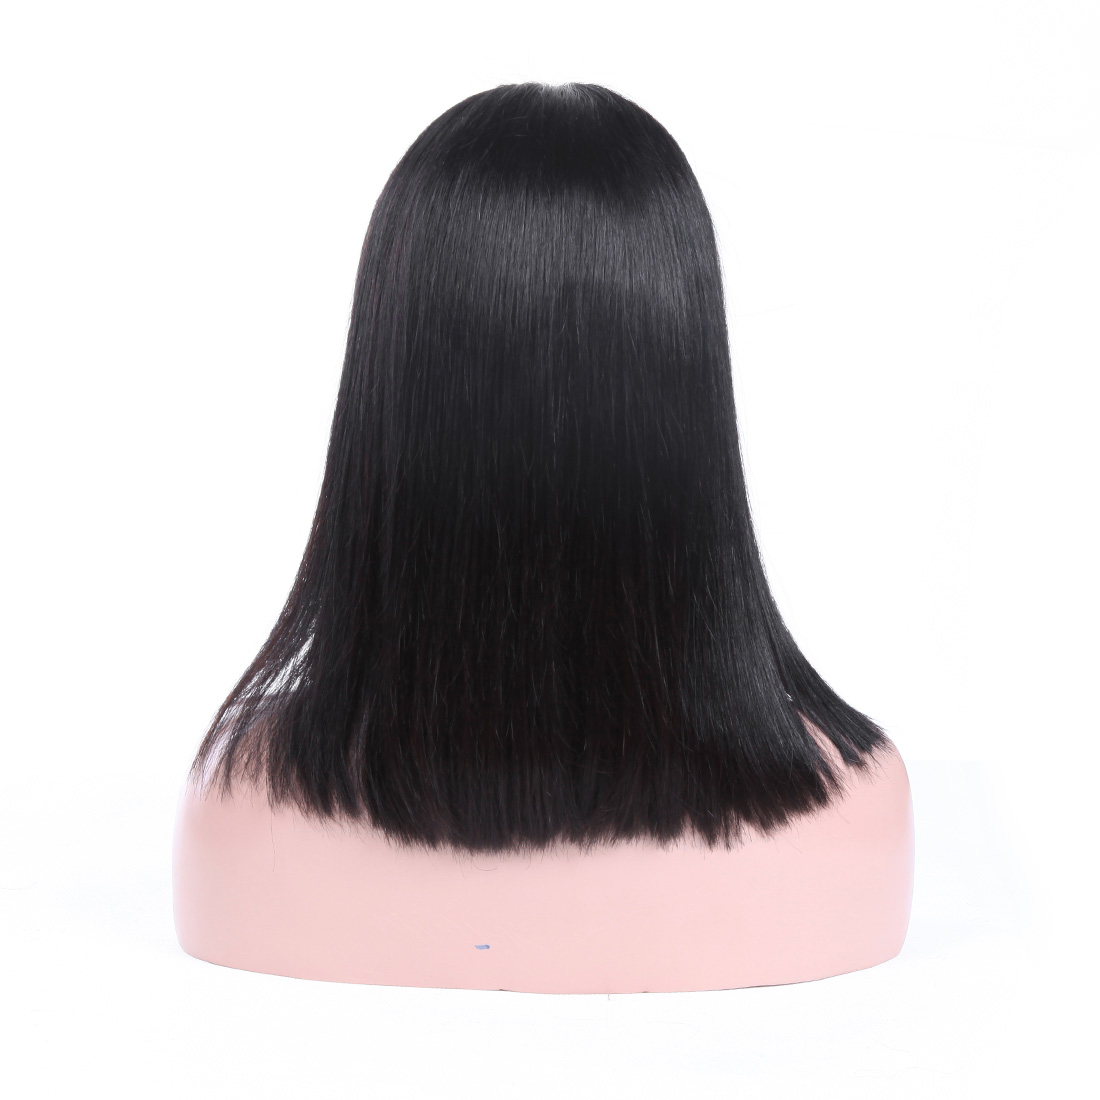 LSY China lace wig supplier black long curly wigs,22 inch human hair lace front wig,no tangle kinky curly lace front wig